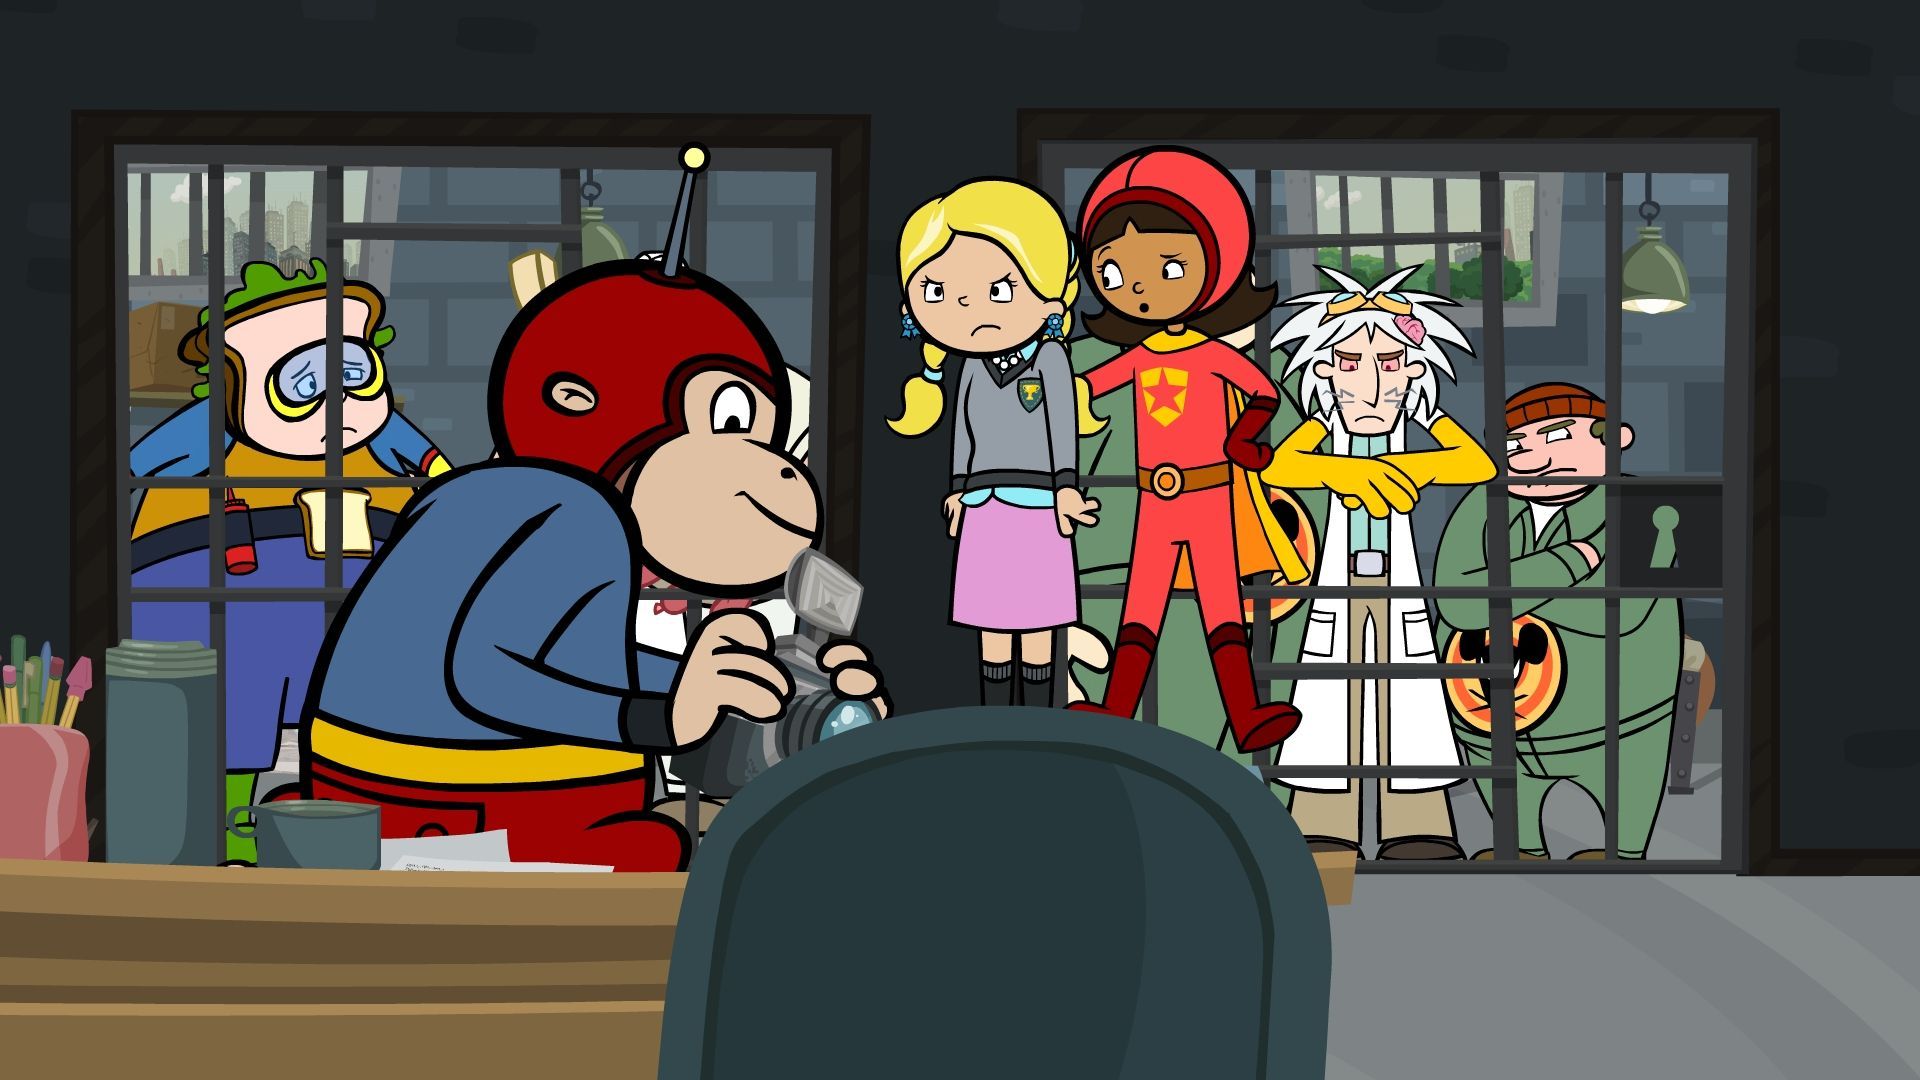 Watch As WordGirl Puts Put Word Wrenching Scoundrels Back In Their Place During 'What's Up With WordGirl Week'!. Star Wars Humor, Pbs Cartoons, Kids Shows